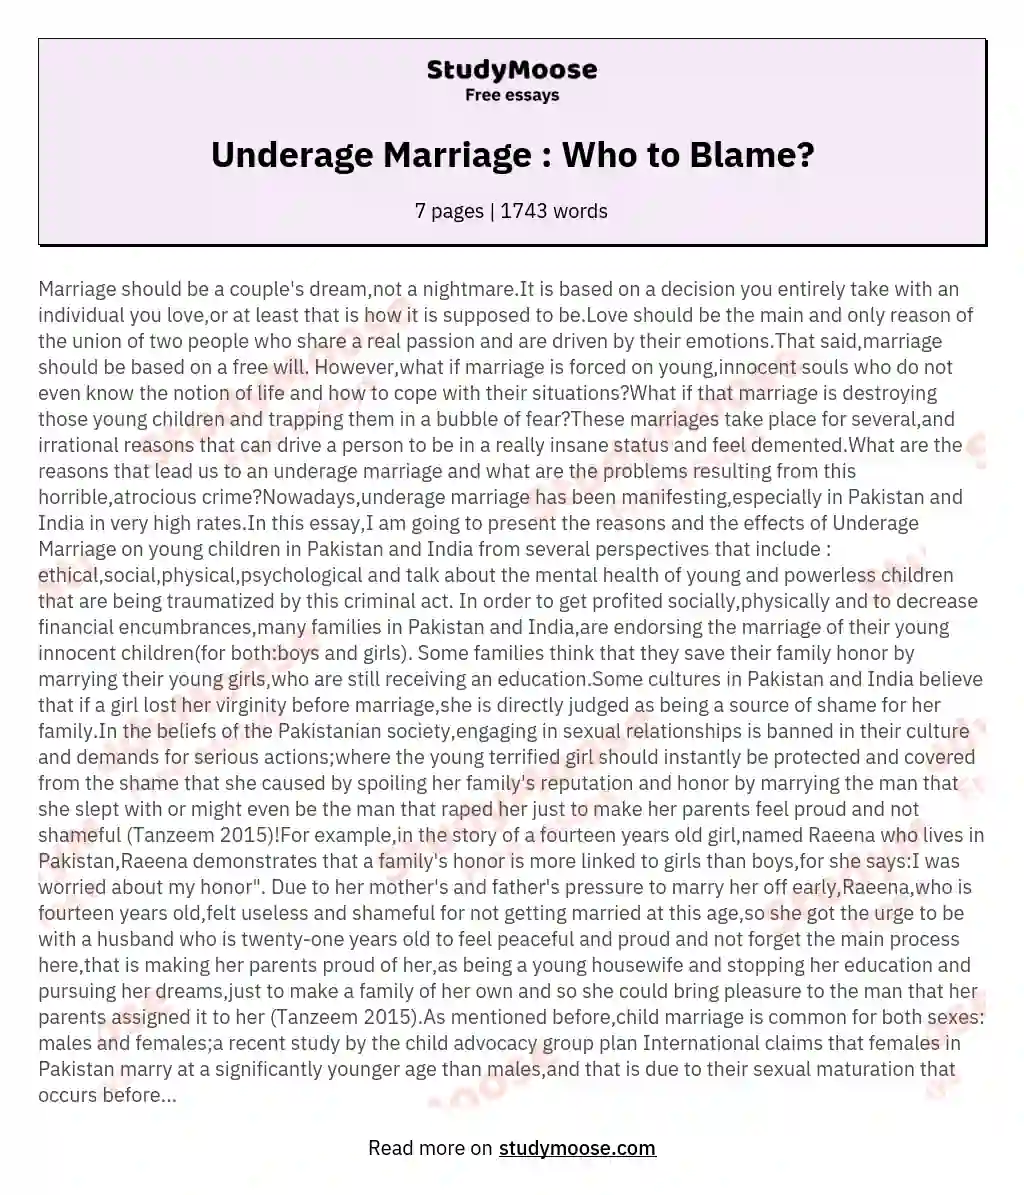 Underage Marriage : Who to Blame?